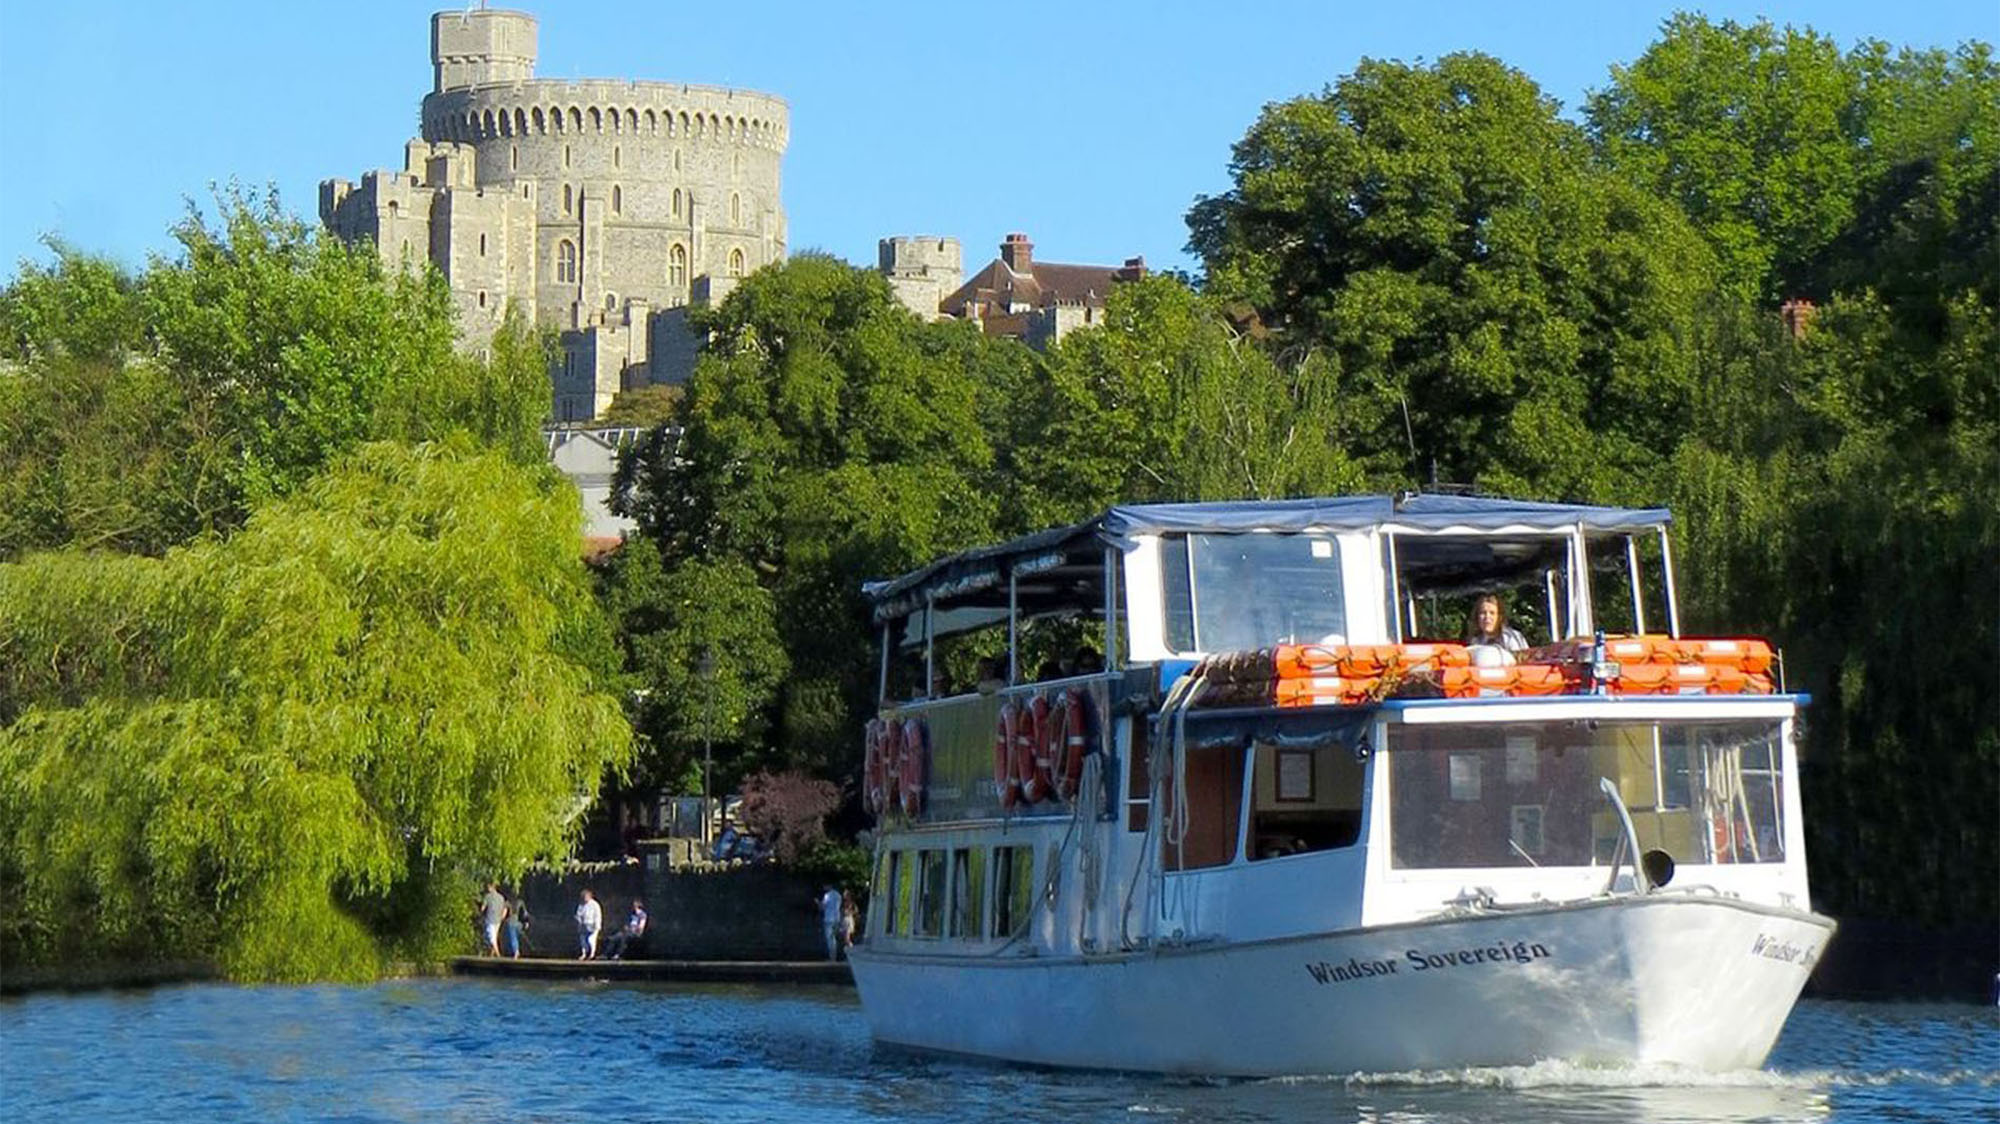 Walks' day tour of Windsor Castle and the surrounding areas in London.